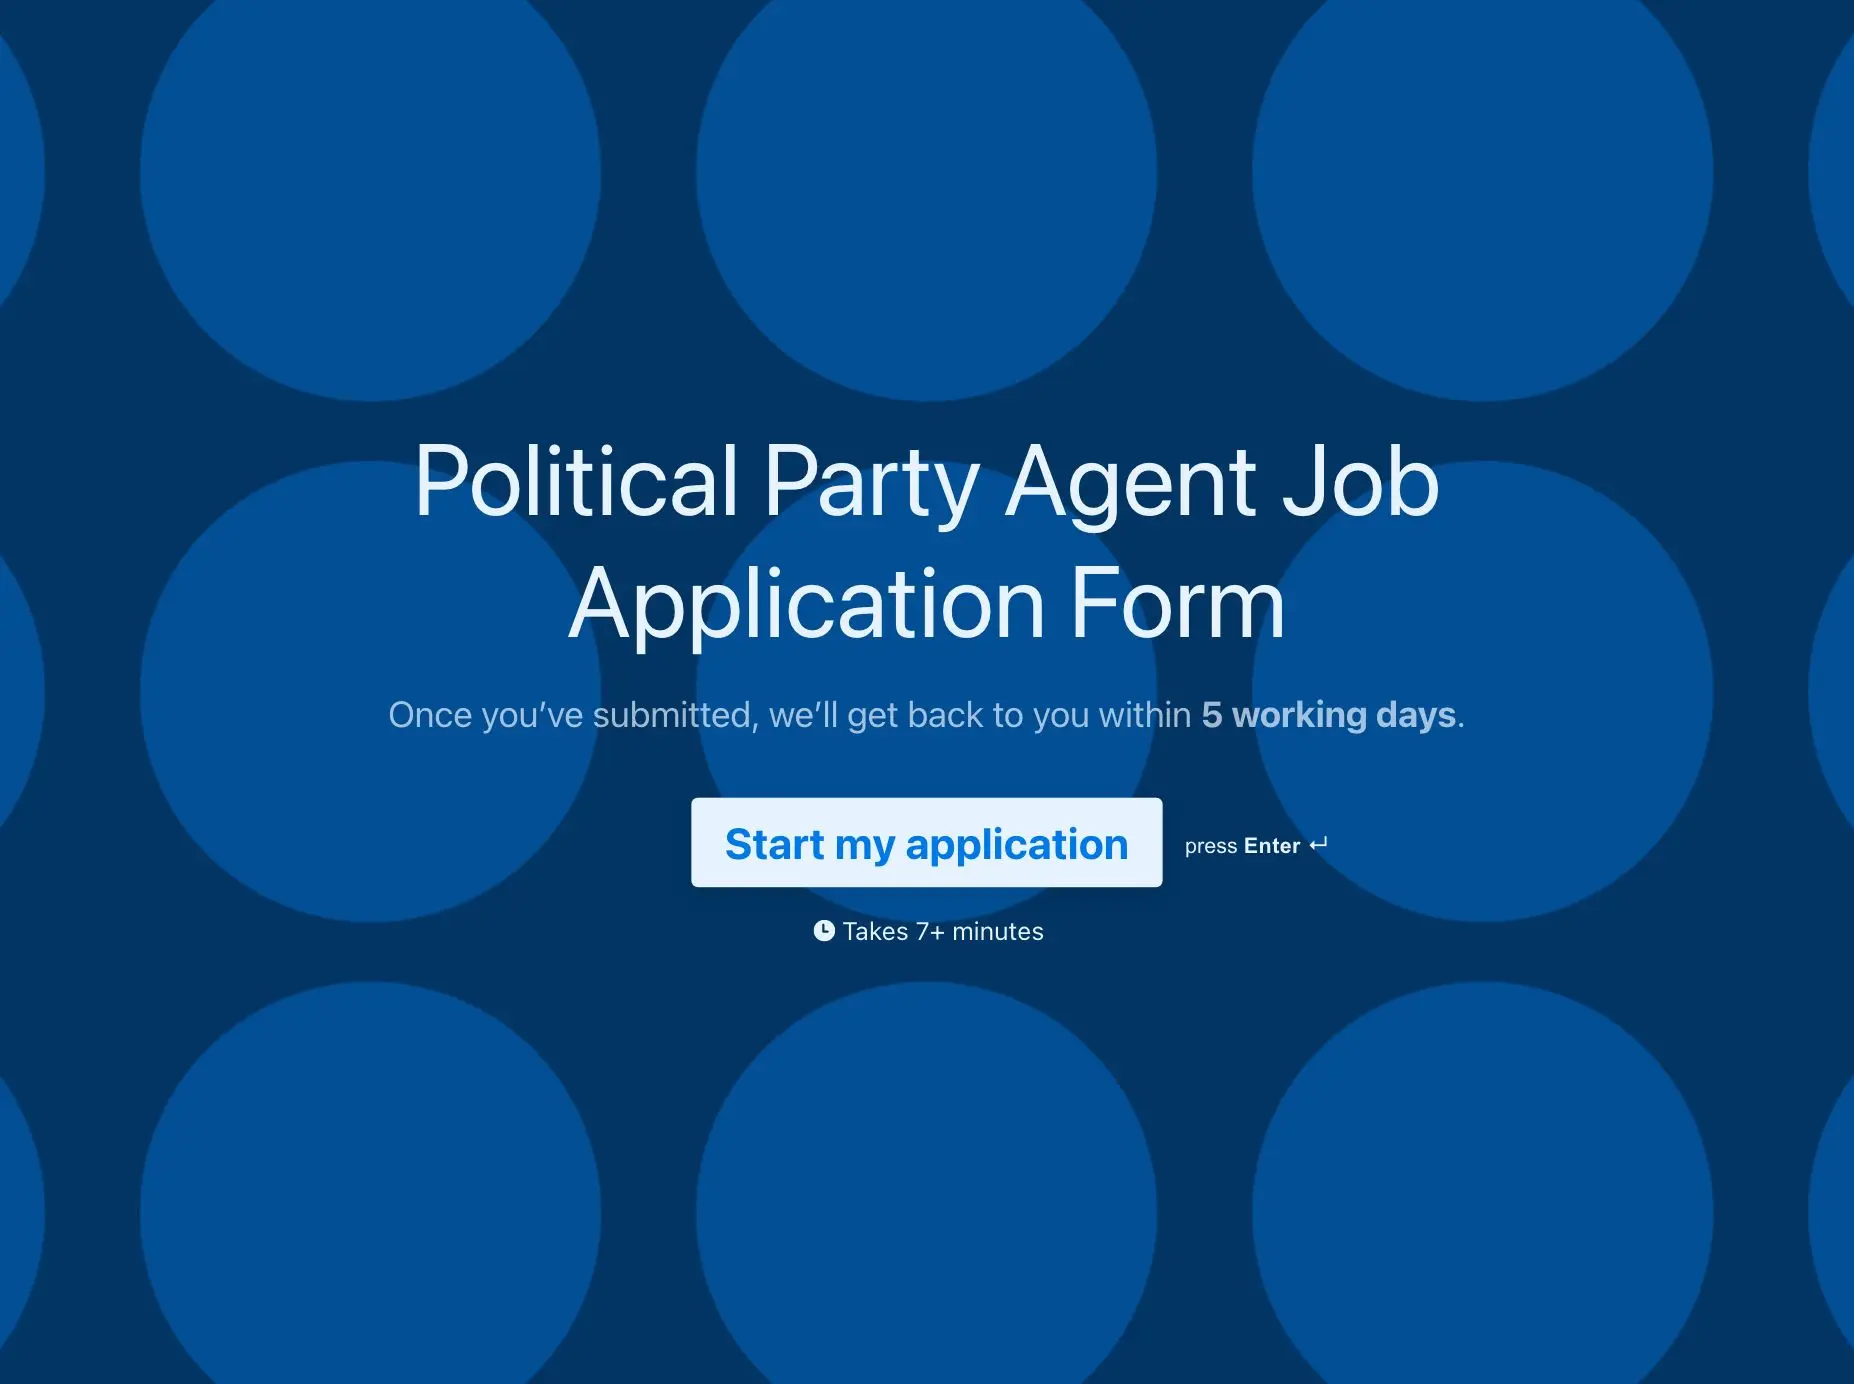 Political Party Agent Job Application Form Template Hero